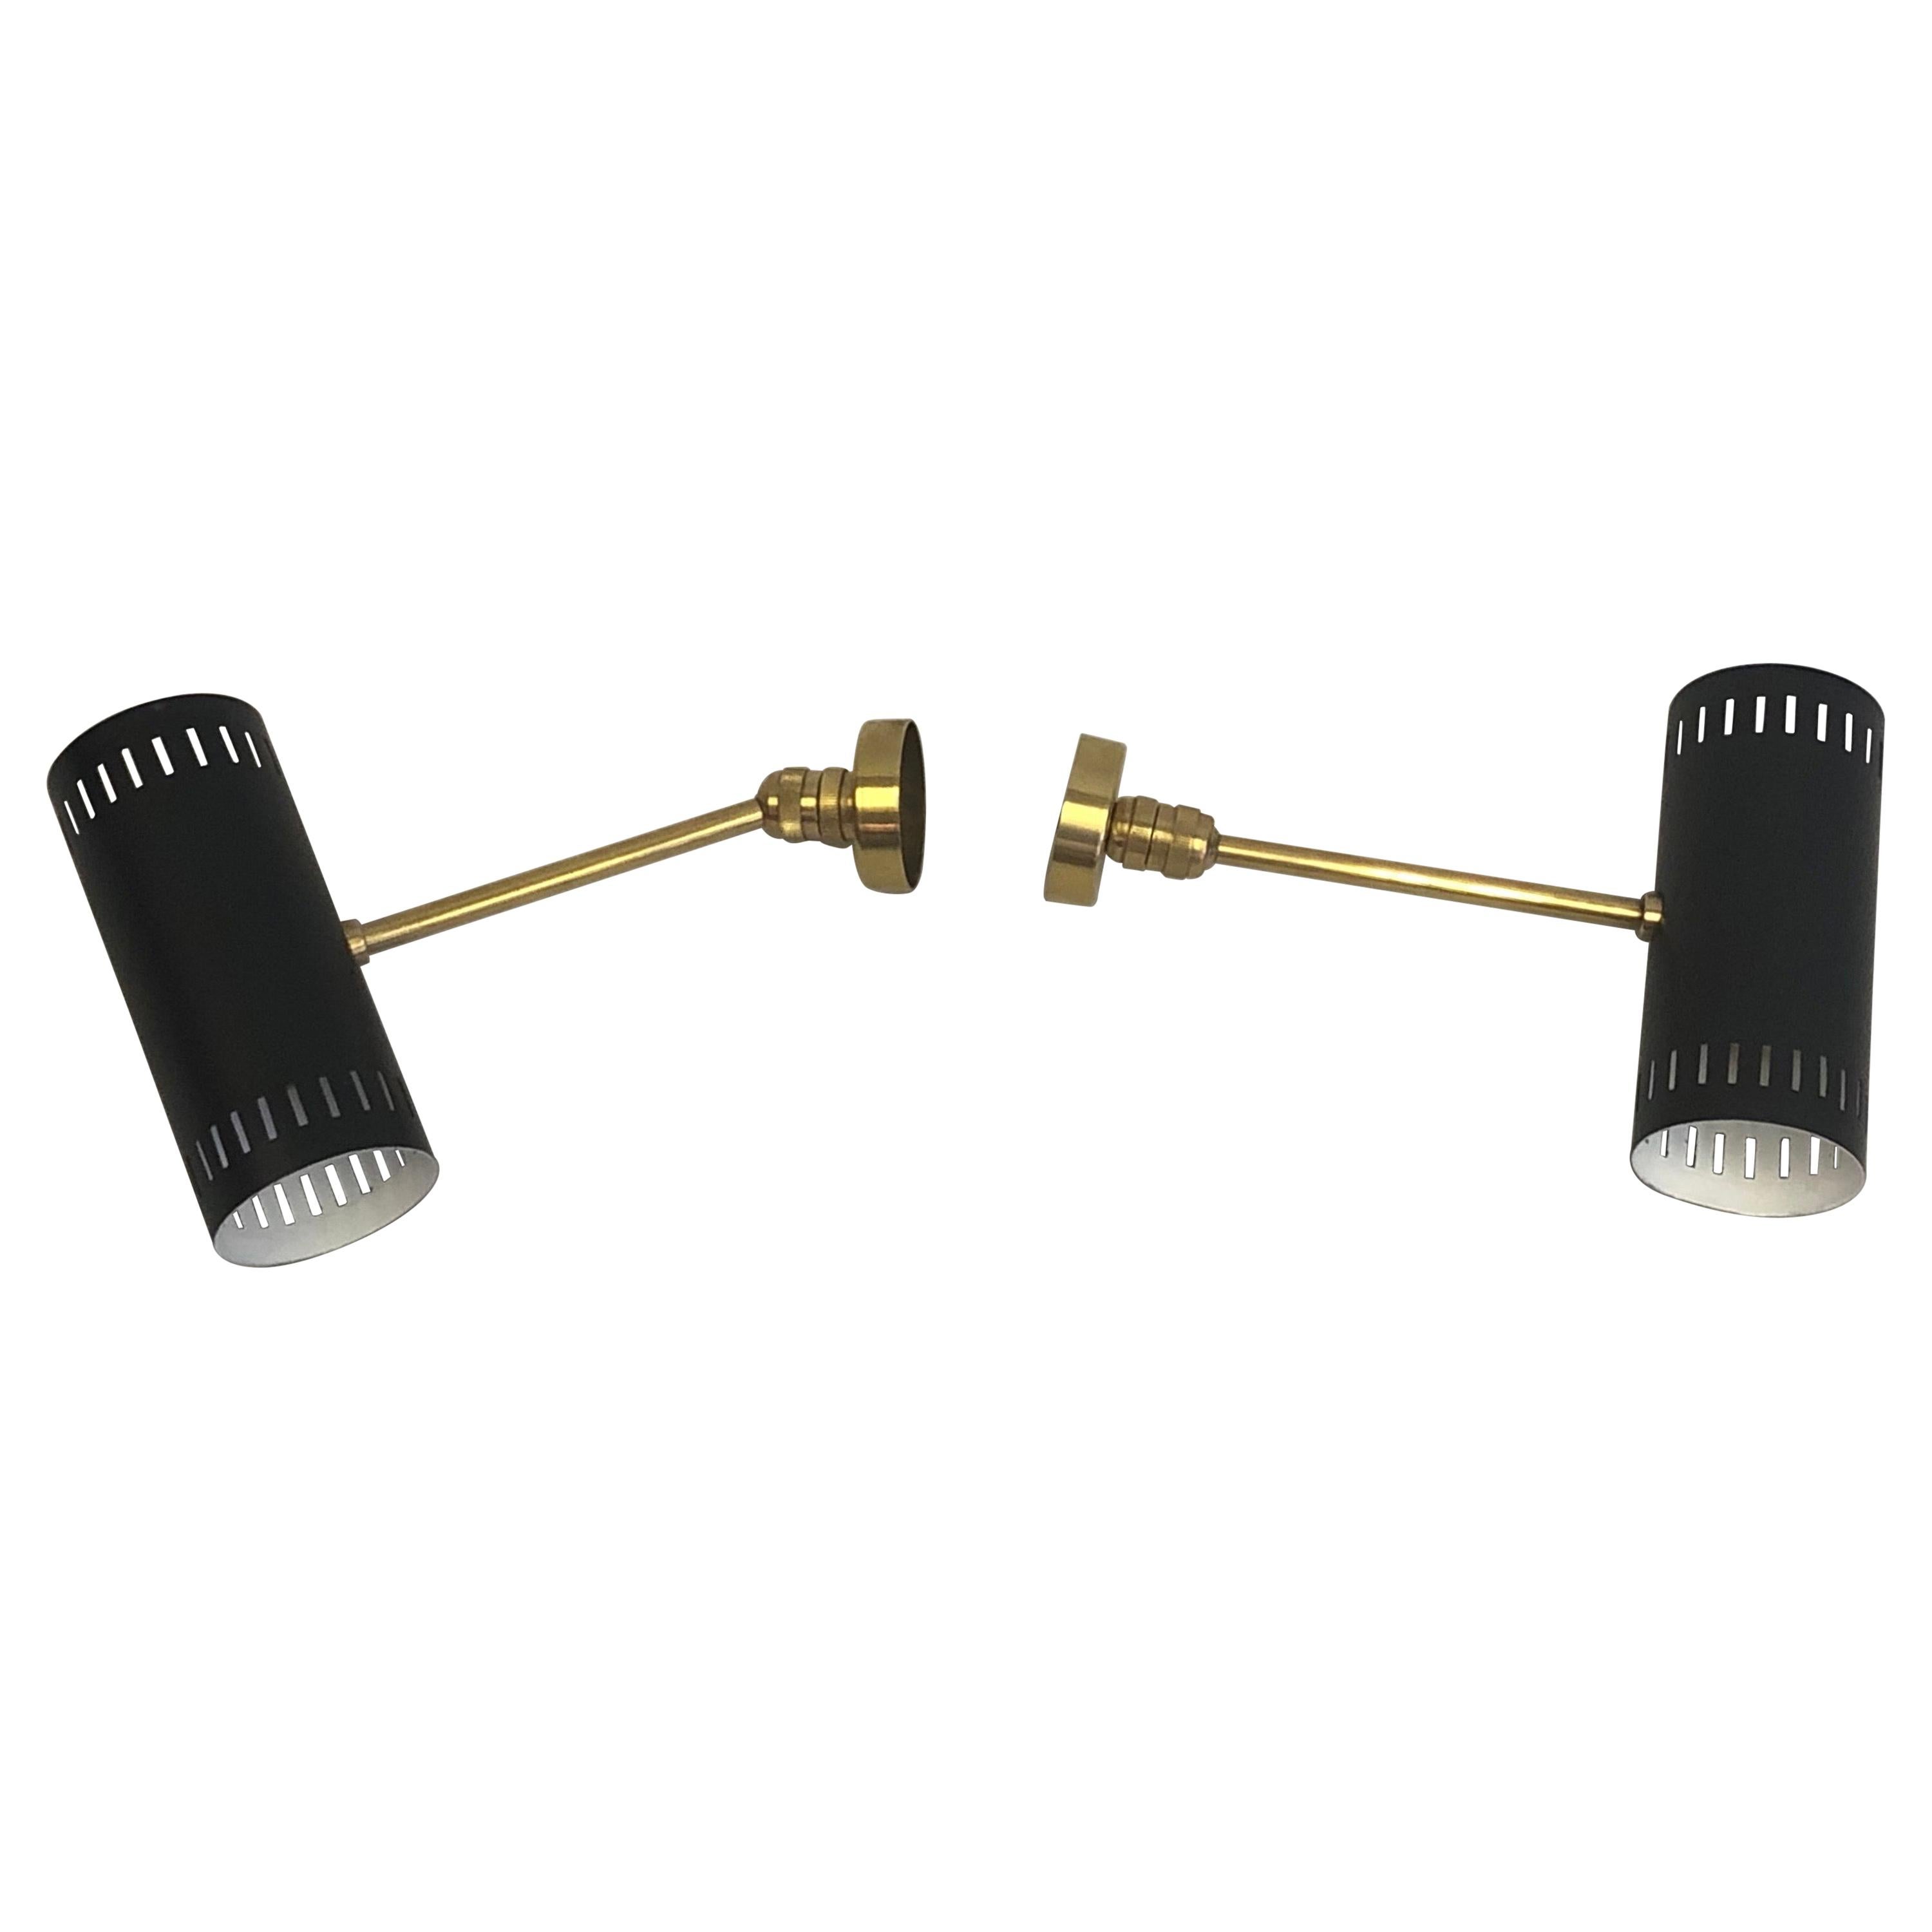 2 pairs of Italian Mid-Century Modern wall sconces / lights by Stilnovo. The sconces reflectors are in black enameled metal with solid brass hardware and pivot to multiple angles to allow one to focus the direction of light. Each reflector has 2